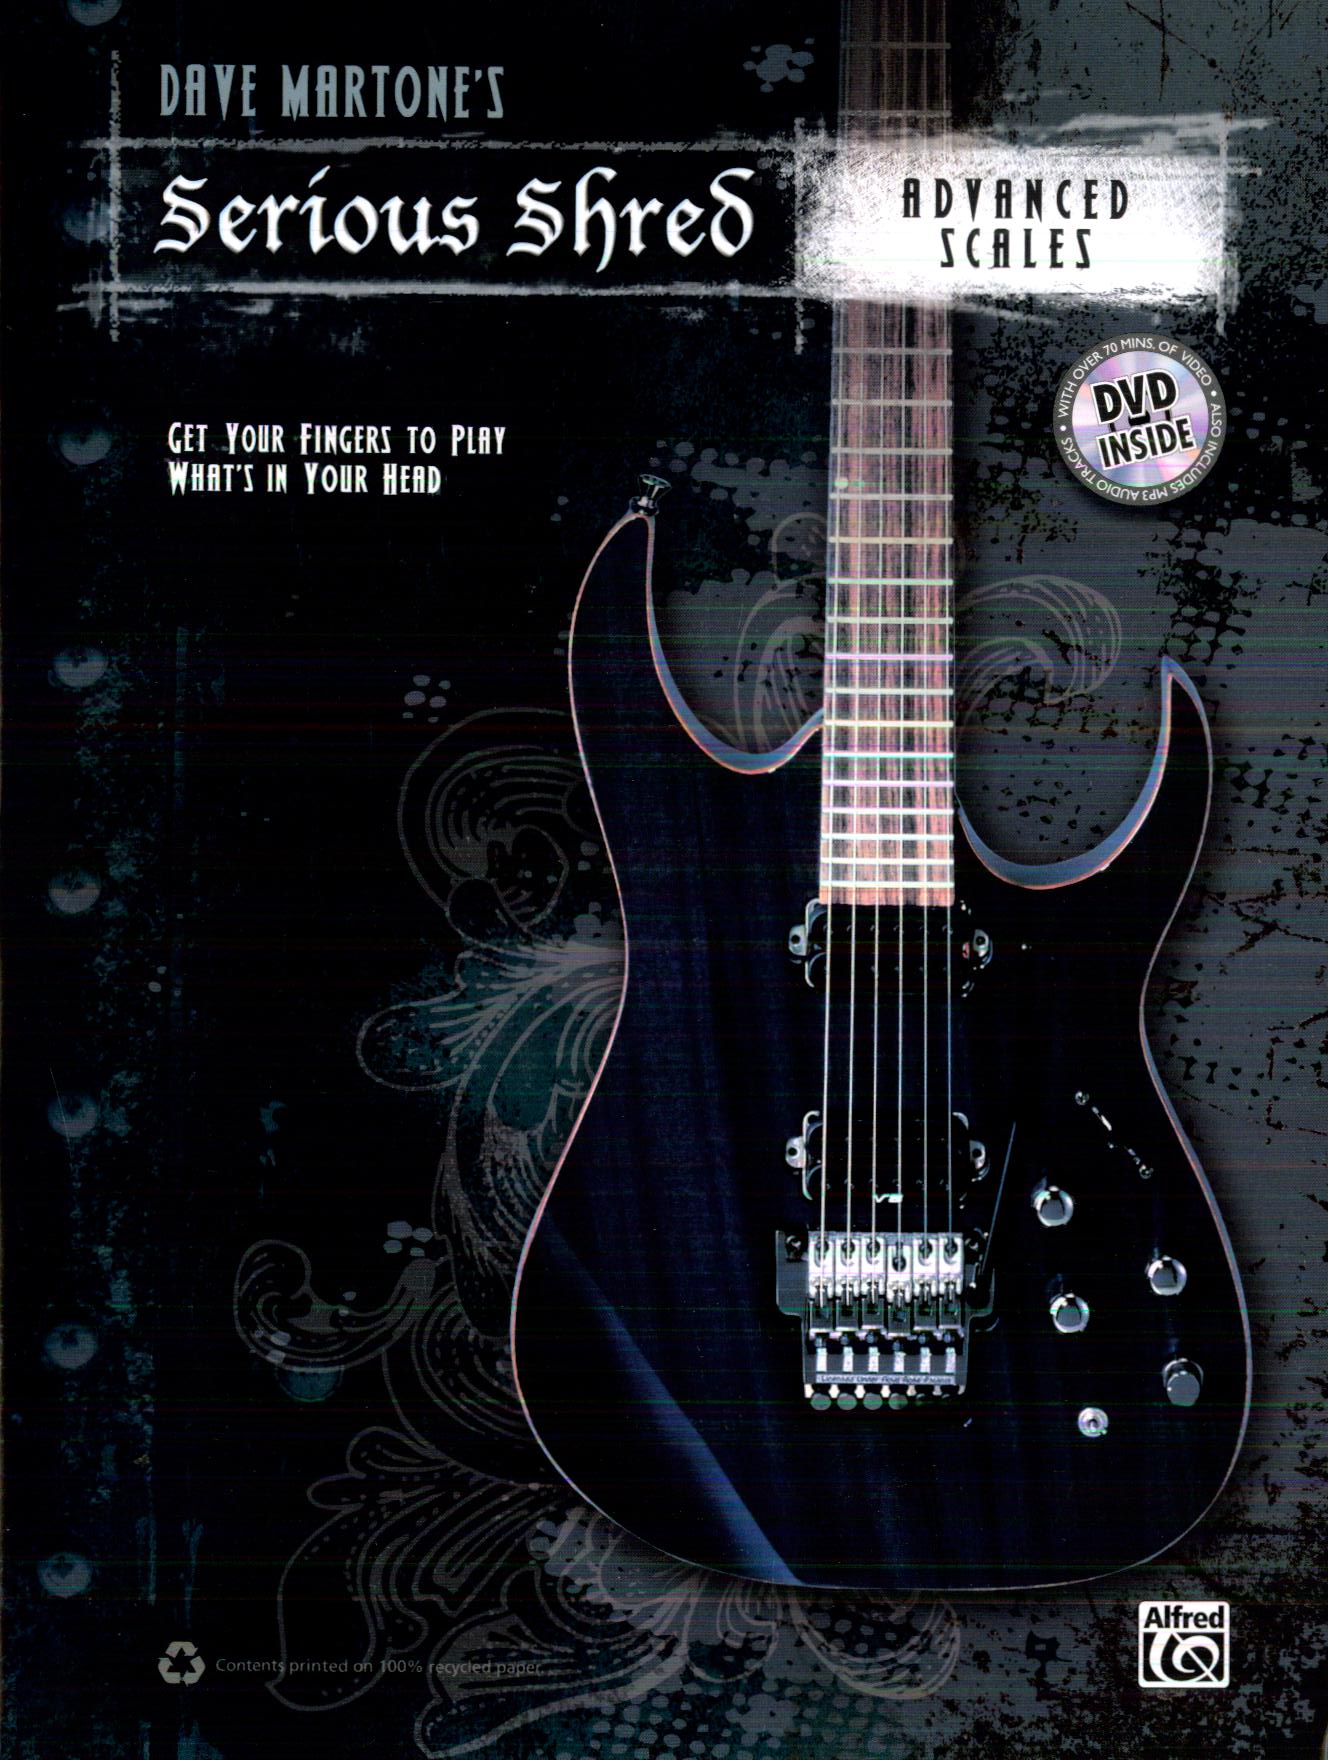 DAVE MARTONE'S SERIOUS SHRED: ADVANCED SCALES